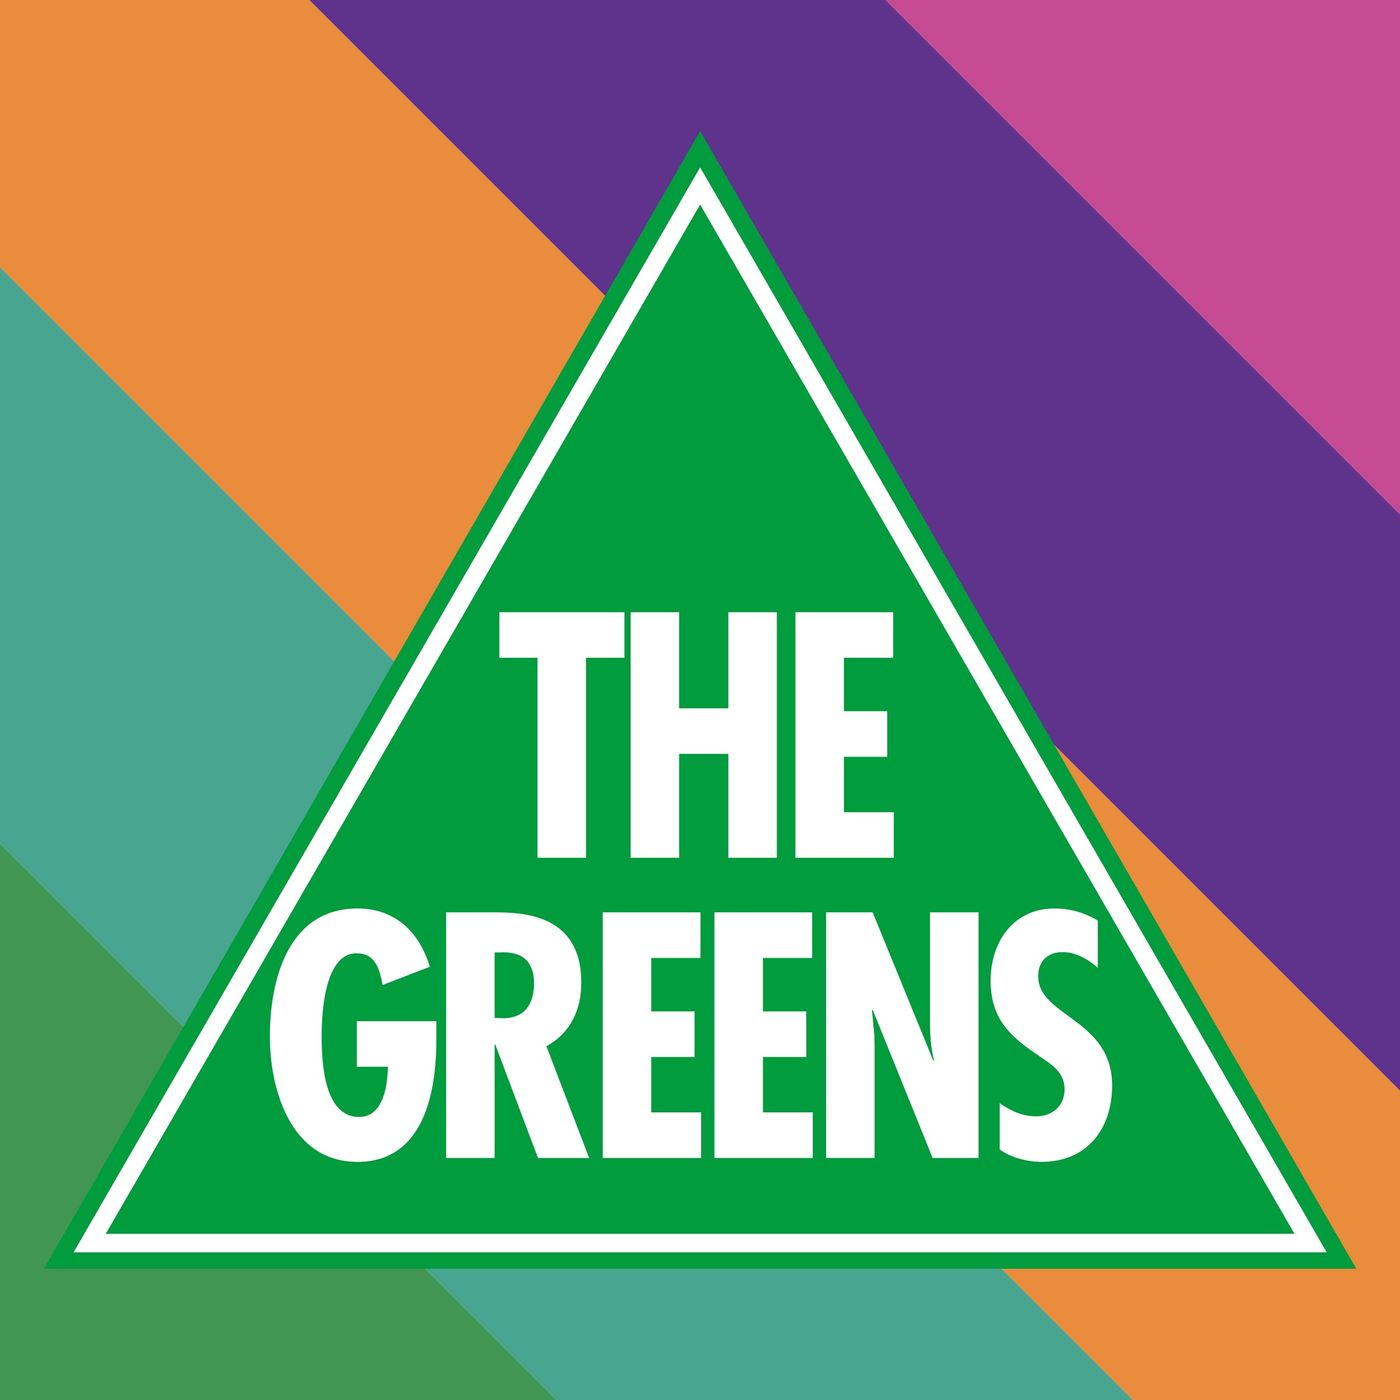 The NSW Greens Podcast